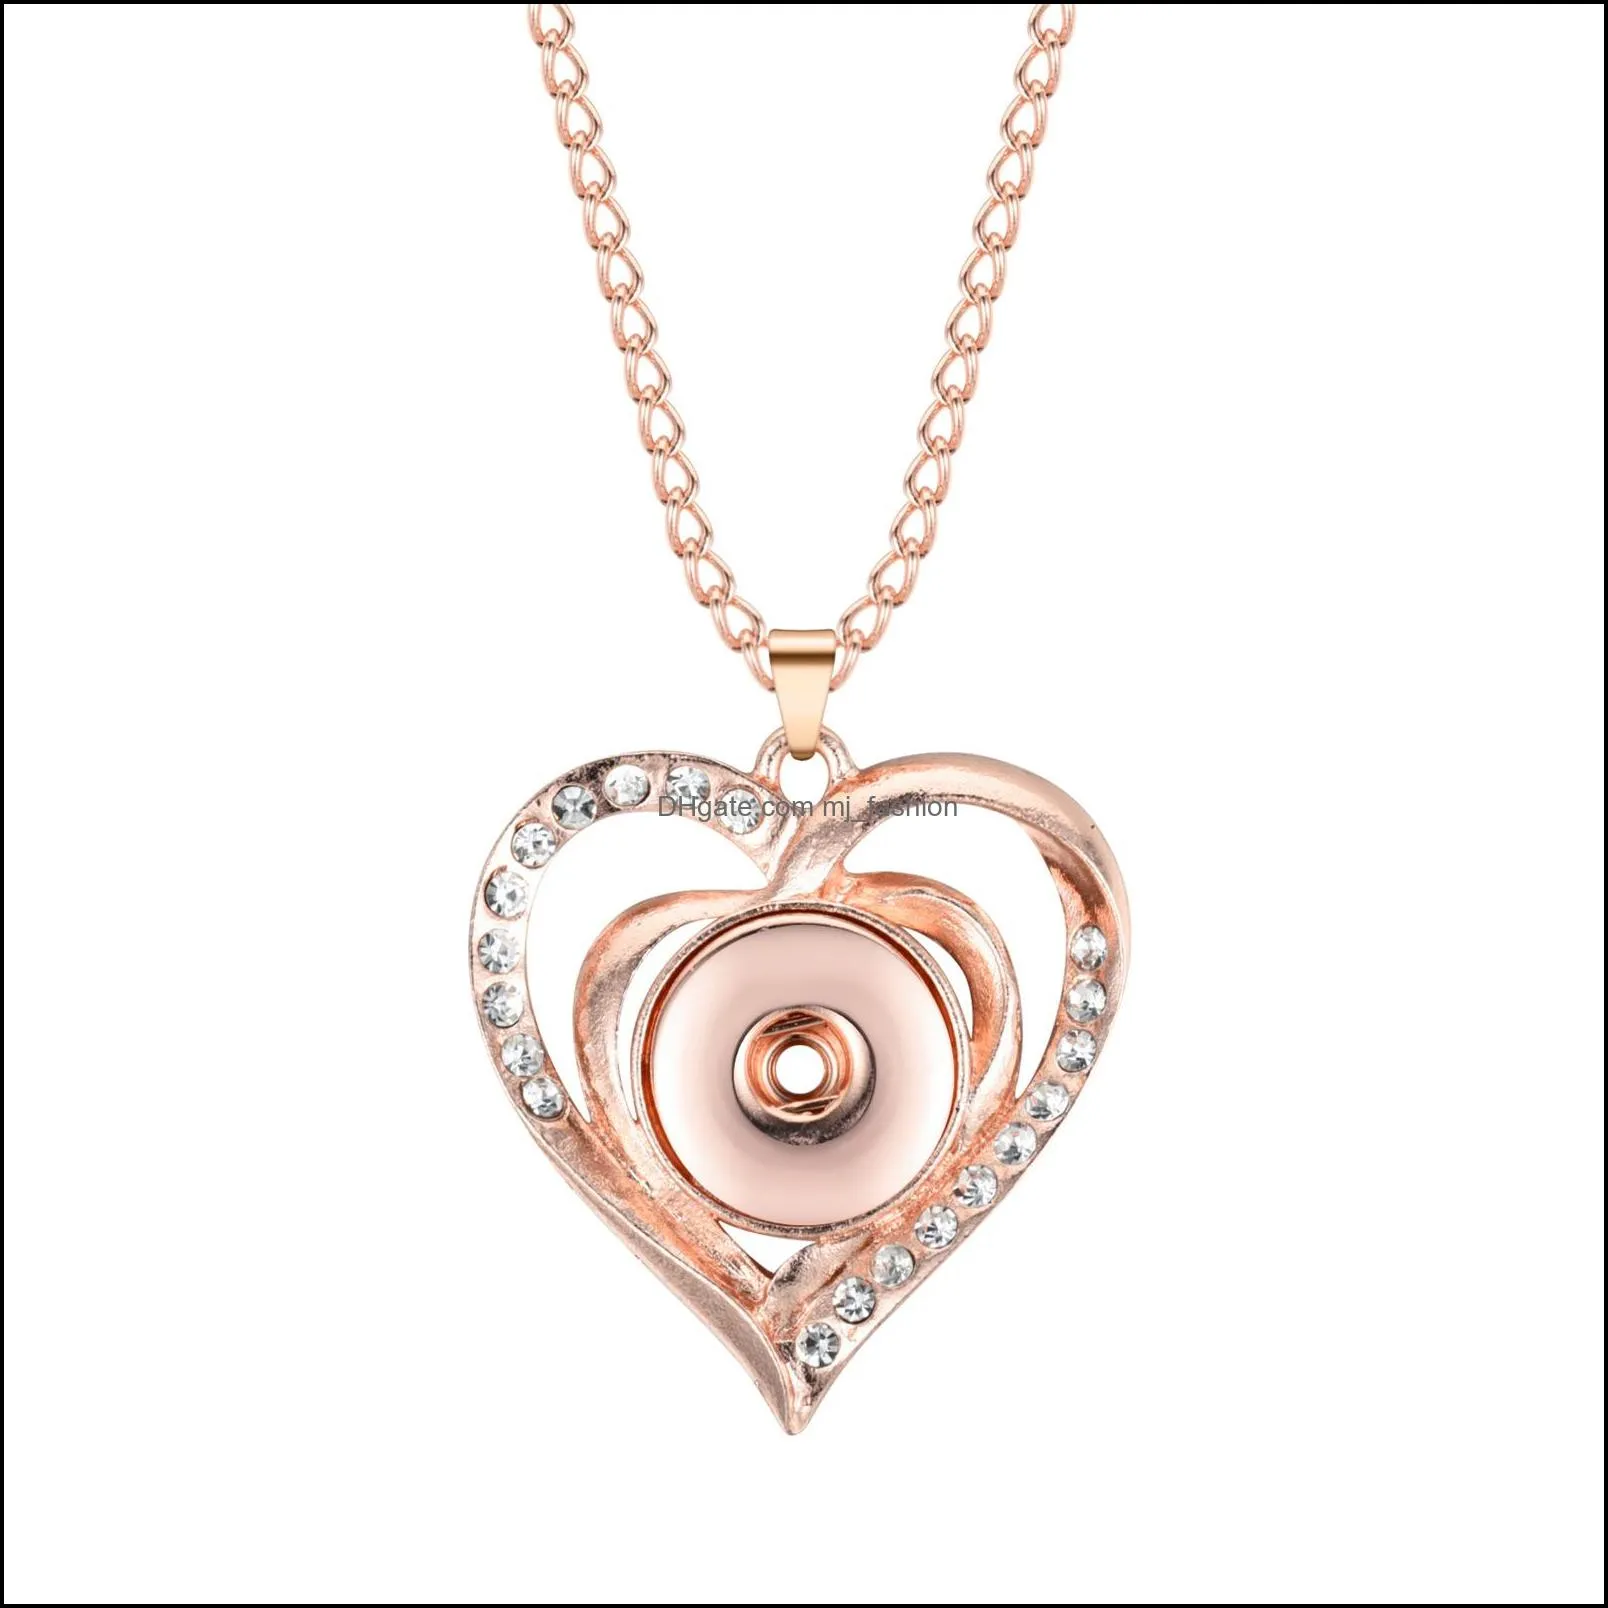 Snap Button Jewelry Rhinestone Silver Rose Gold Heart shape Pendant Fit 18mm Snaps Buttons Necklace for Women Men Noosa